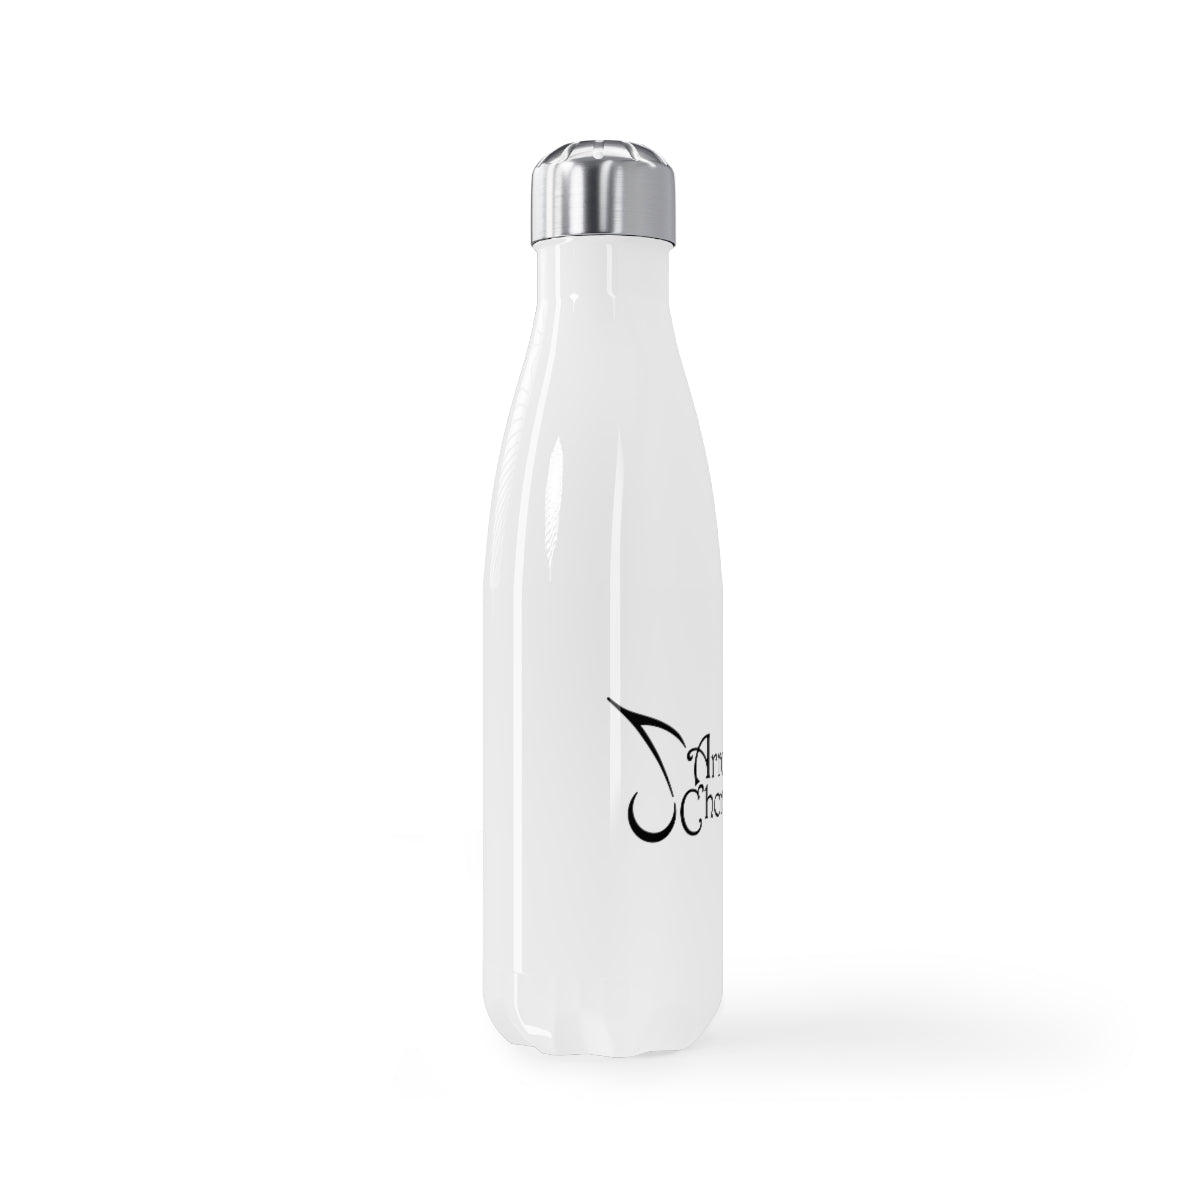 Arrowhead Chorale Stainless Steel Water Bottle, 17oz - DSP On Demand